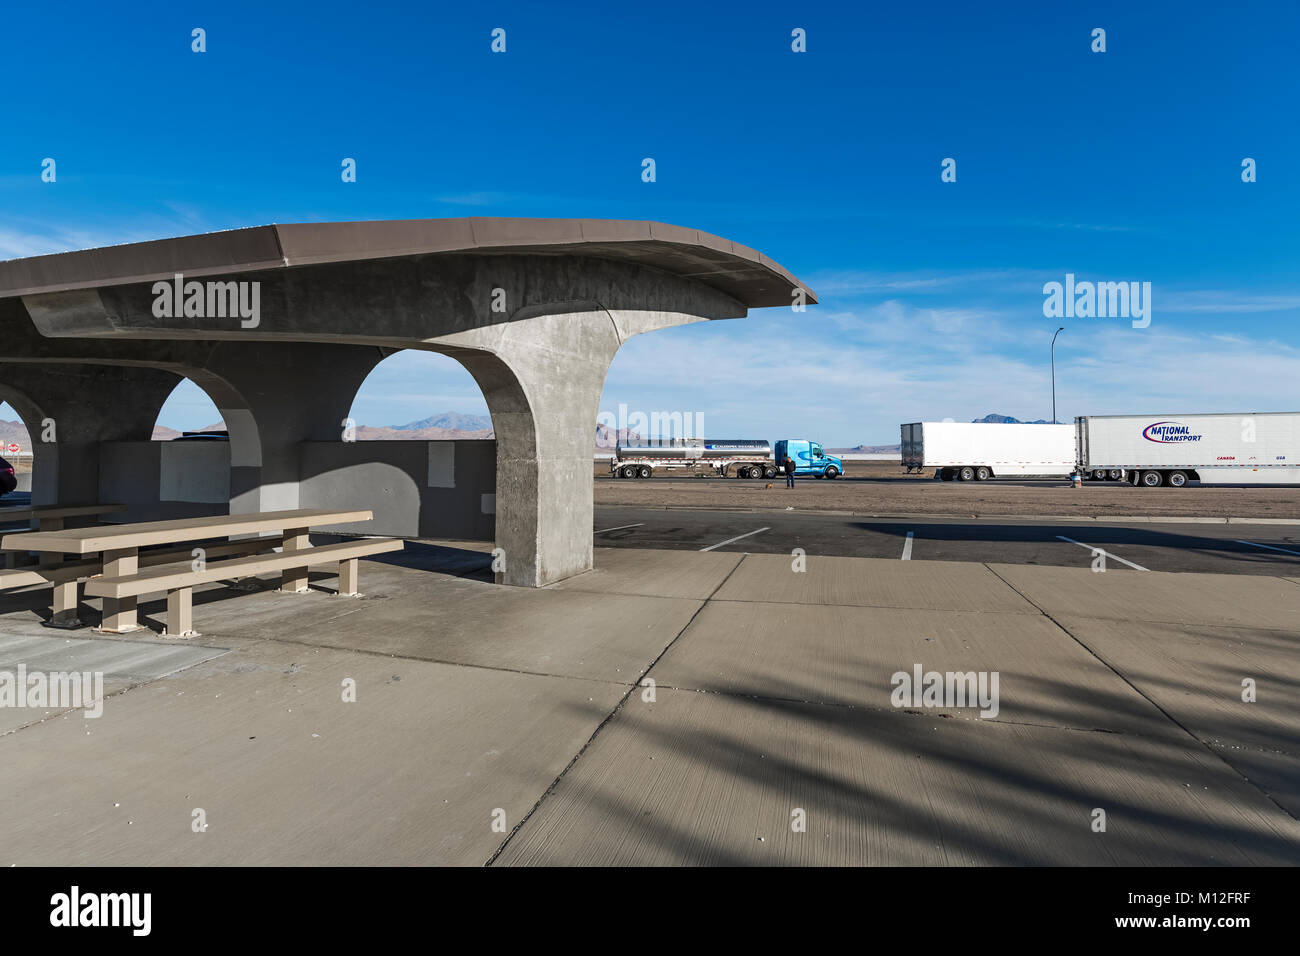 Futuristic concrete structure at the Wendover Salt Flats Rest Area along Interstate 80 where the highway crossed the Bonneville Salt Flats, Utah, USA Stock Photo